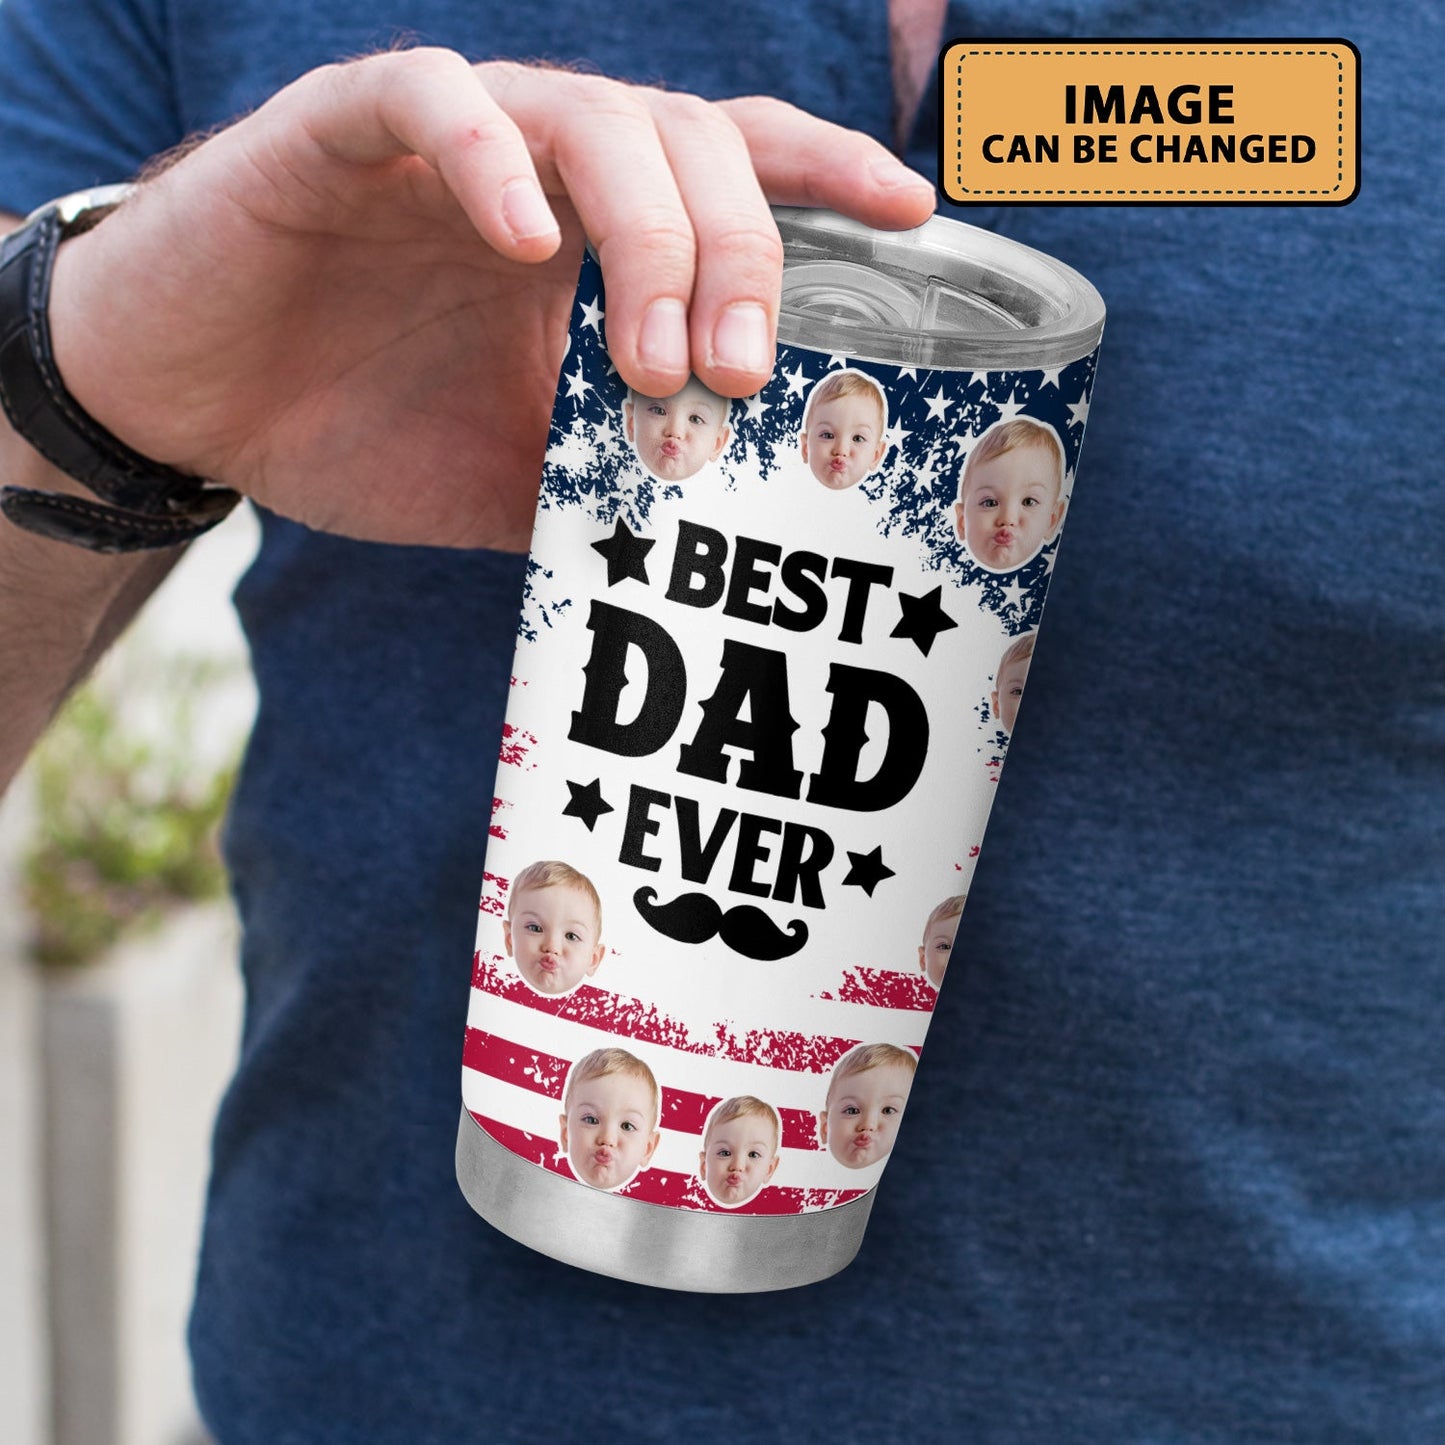 Best Dad Ever New Dad USA Flag Personalized Face 20Oz Tumbler